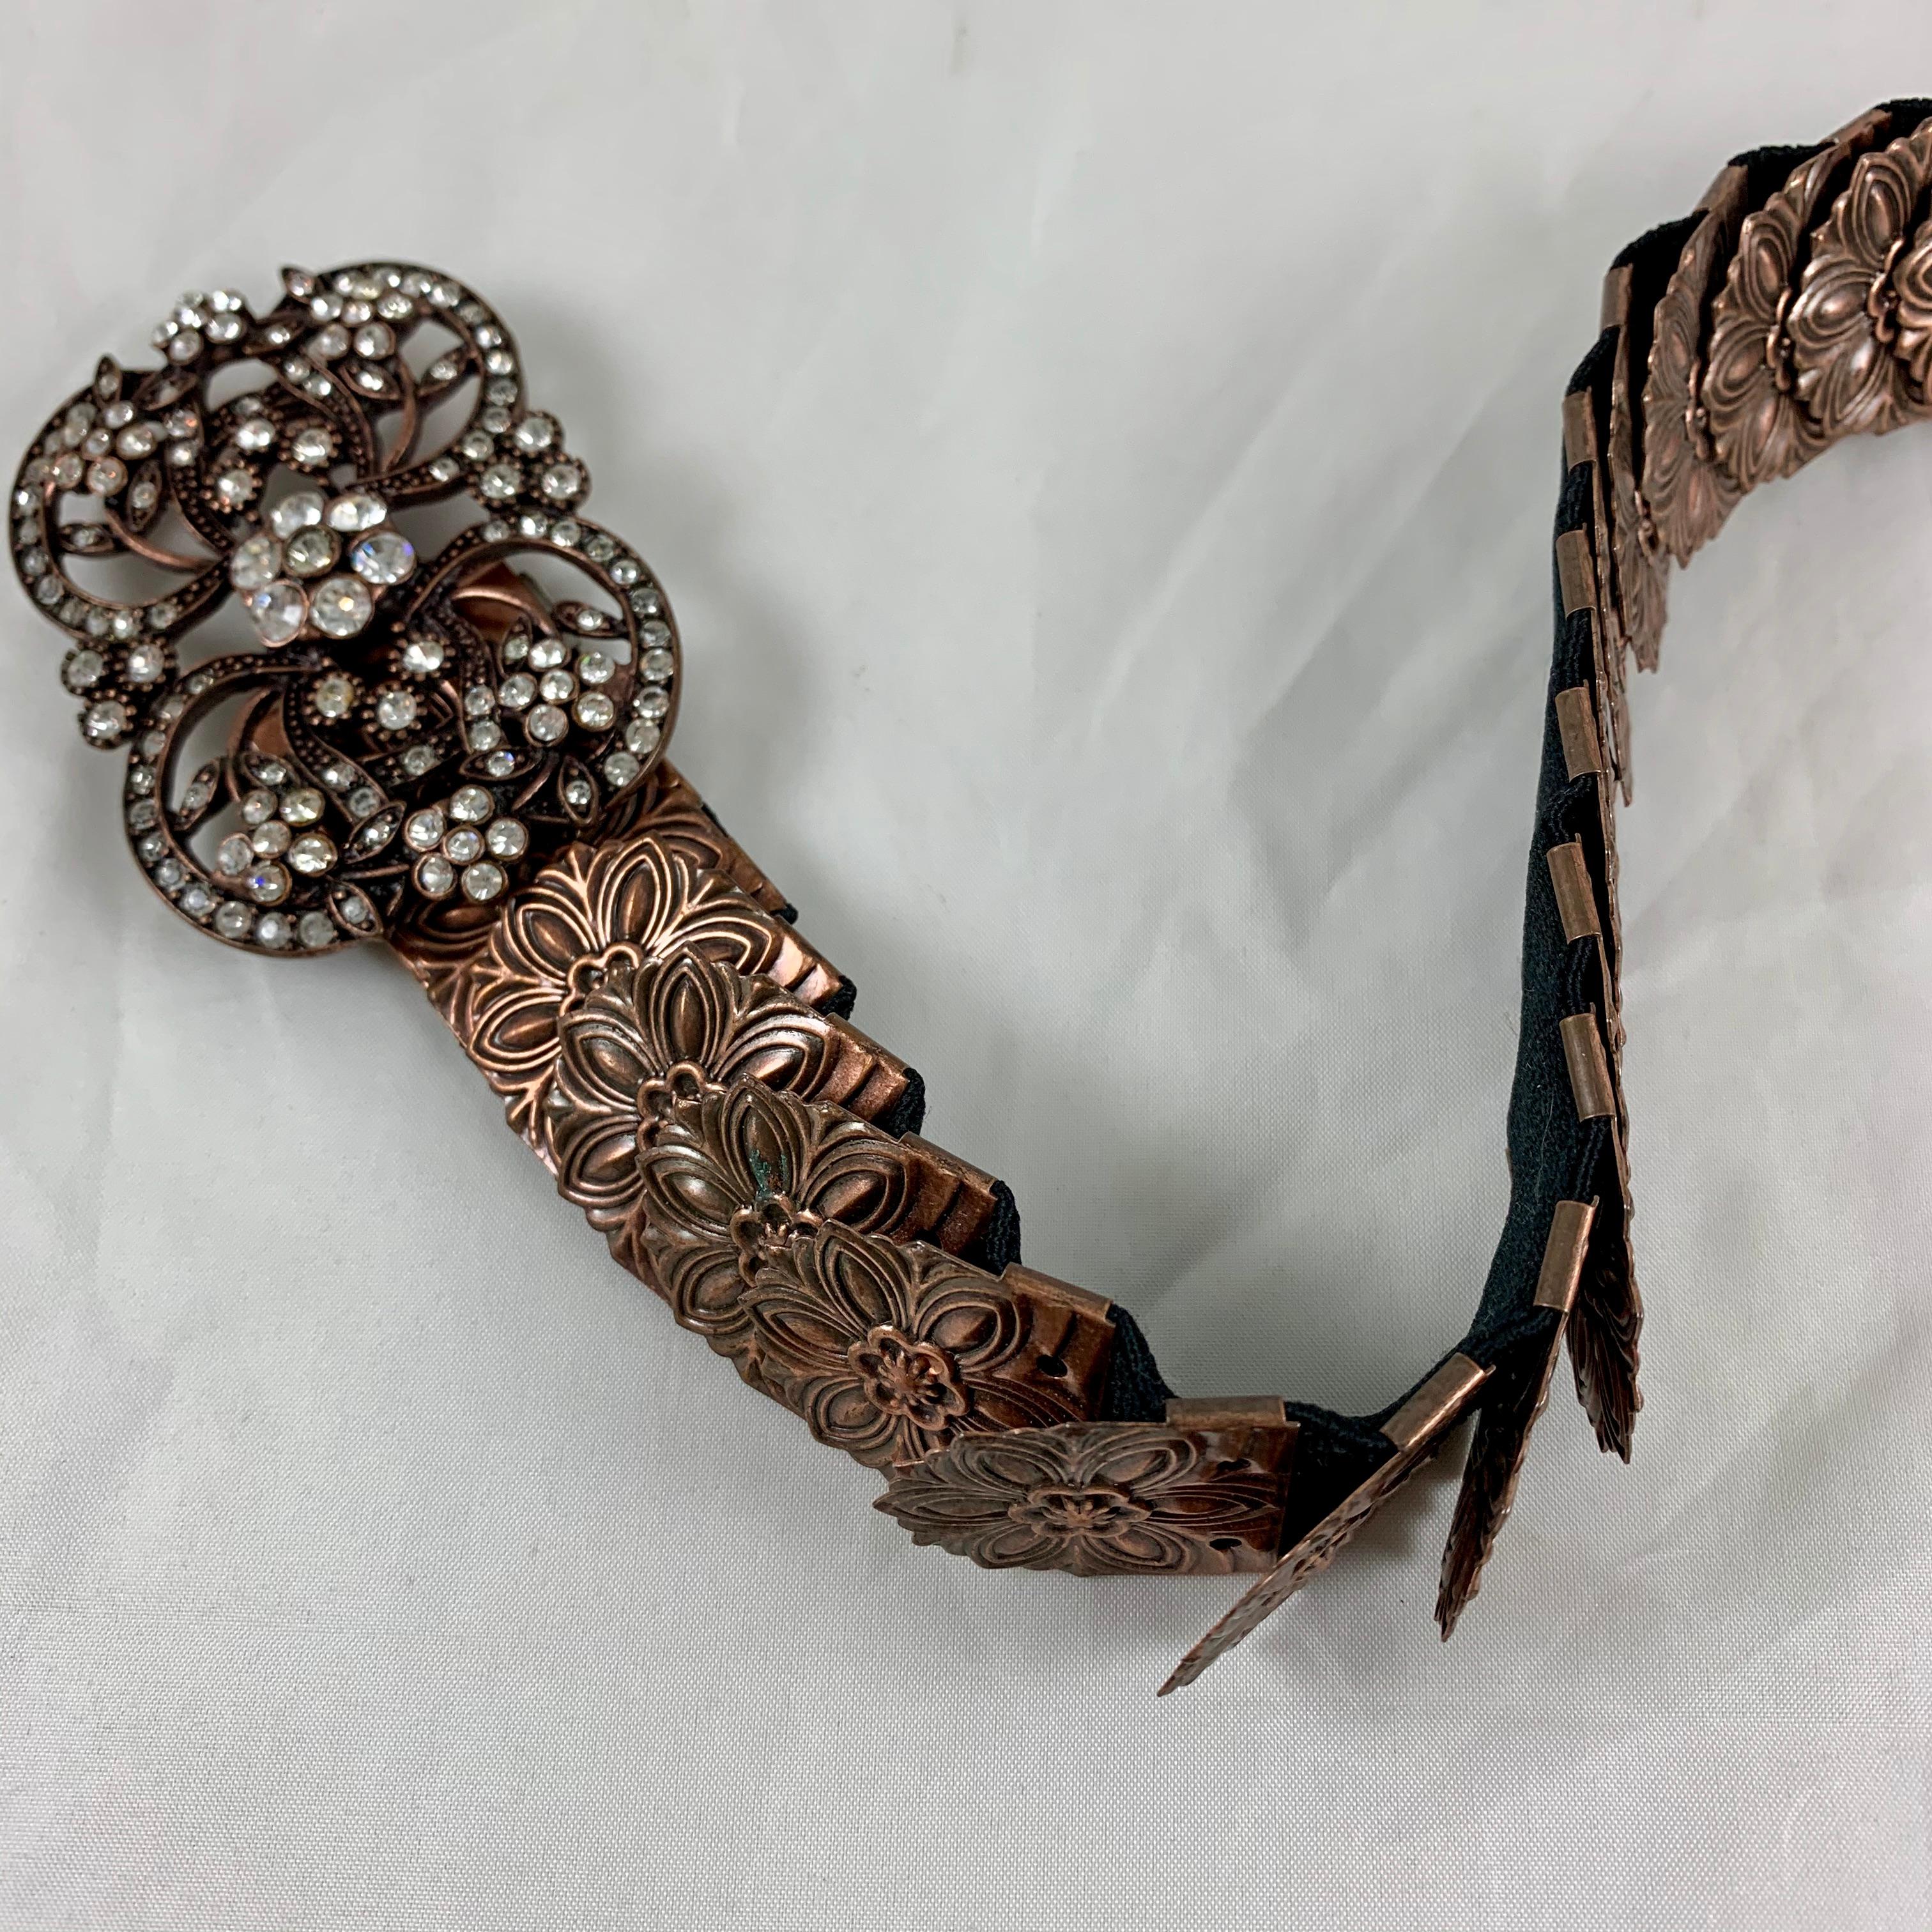 Appliqué 1970s Era Copper-Tone Snake Scale Metal and Crystal Jeweled Buckle Handmade Belt For Sale